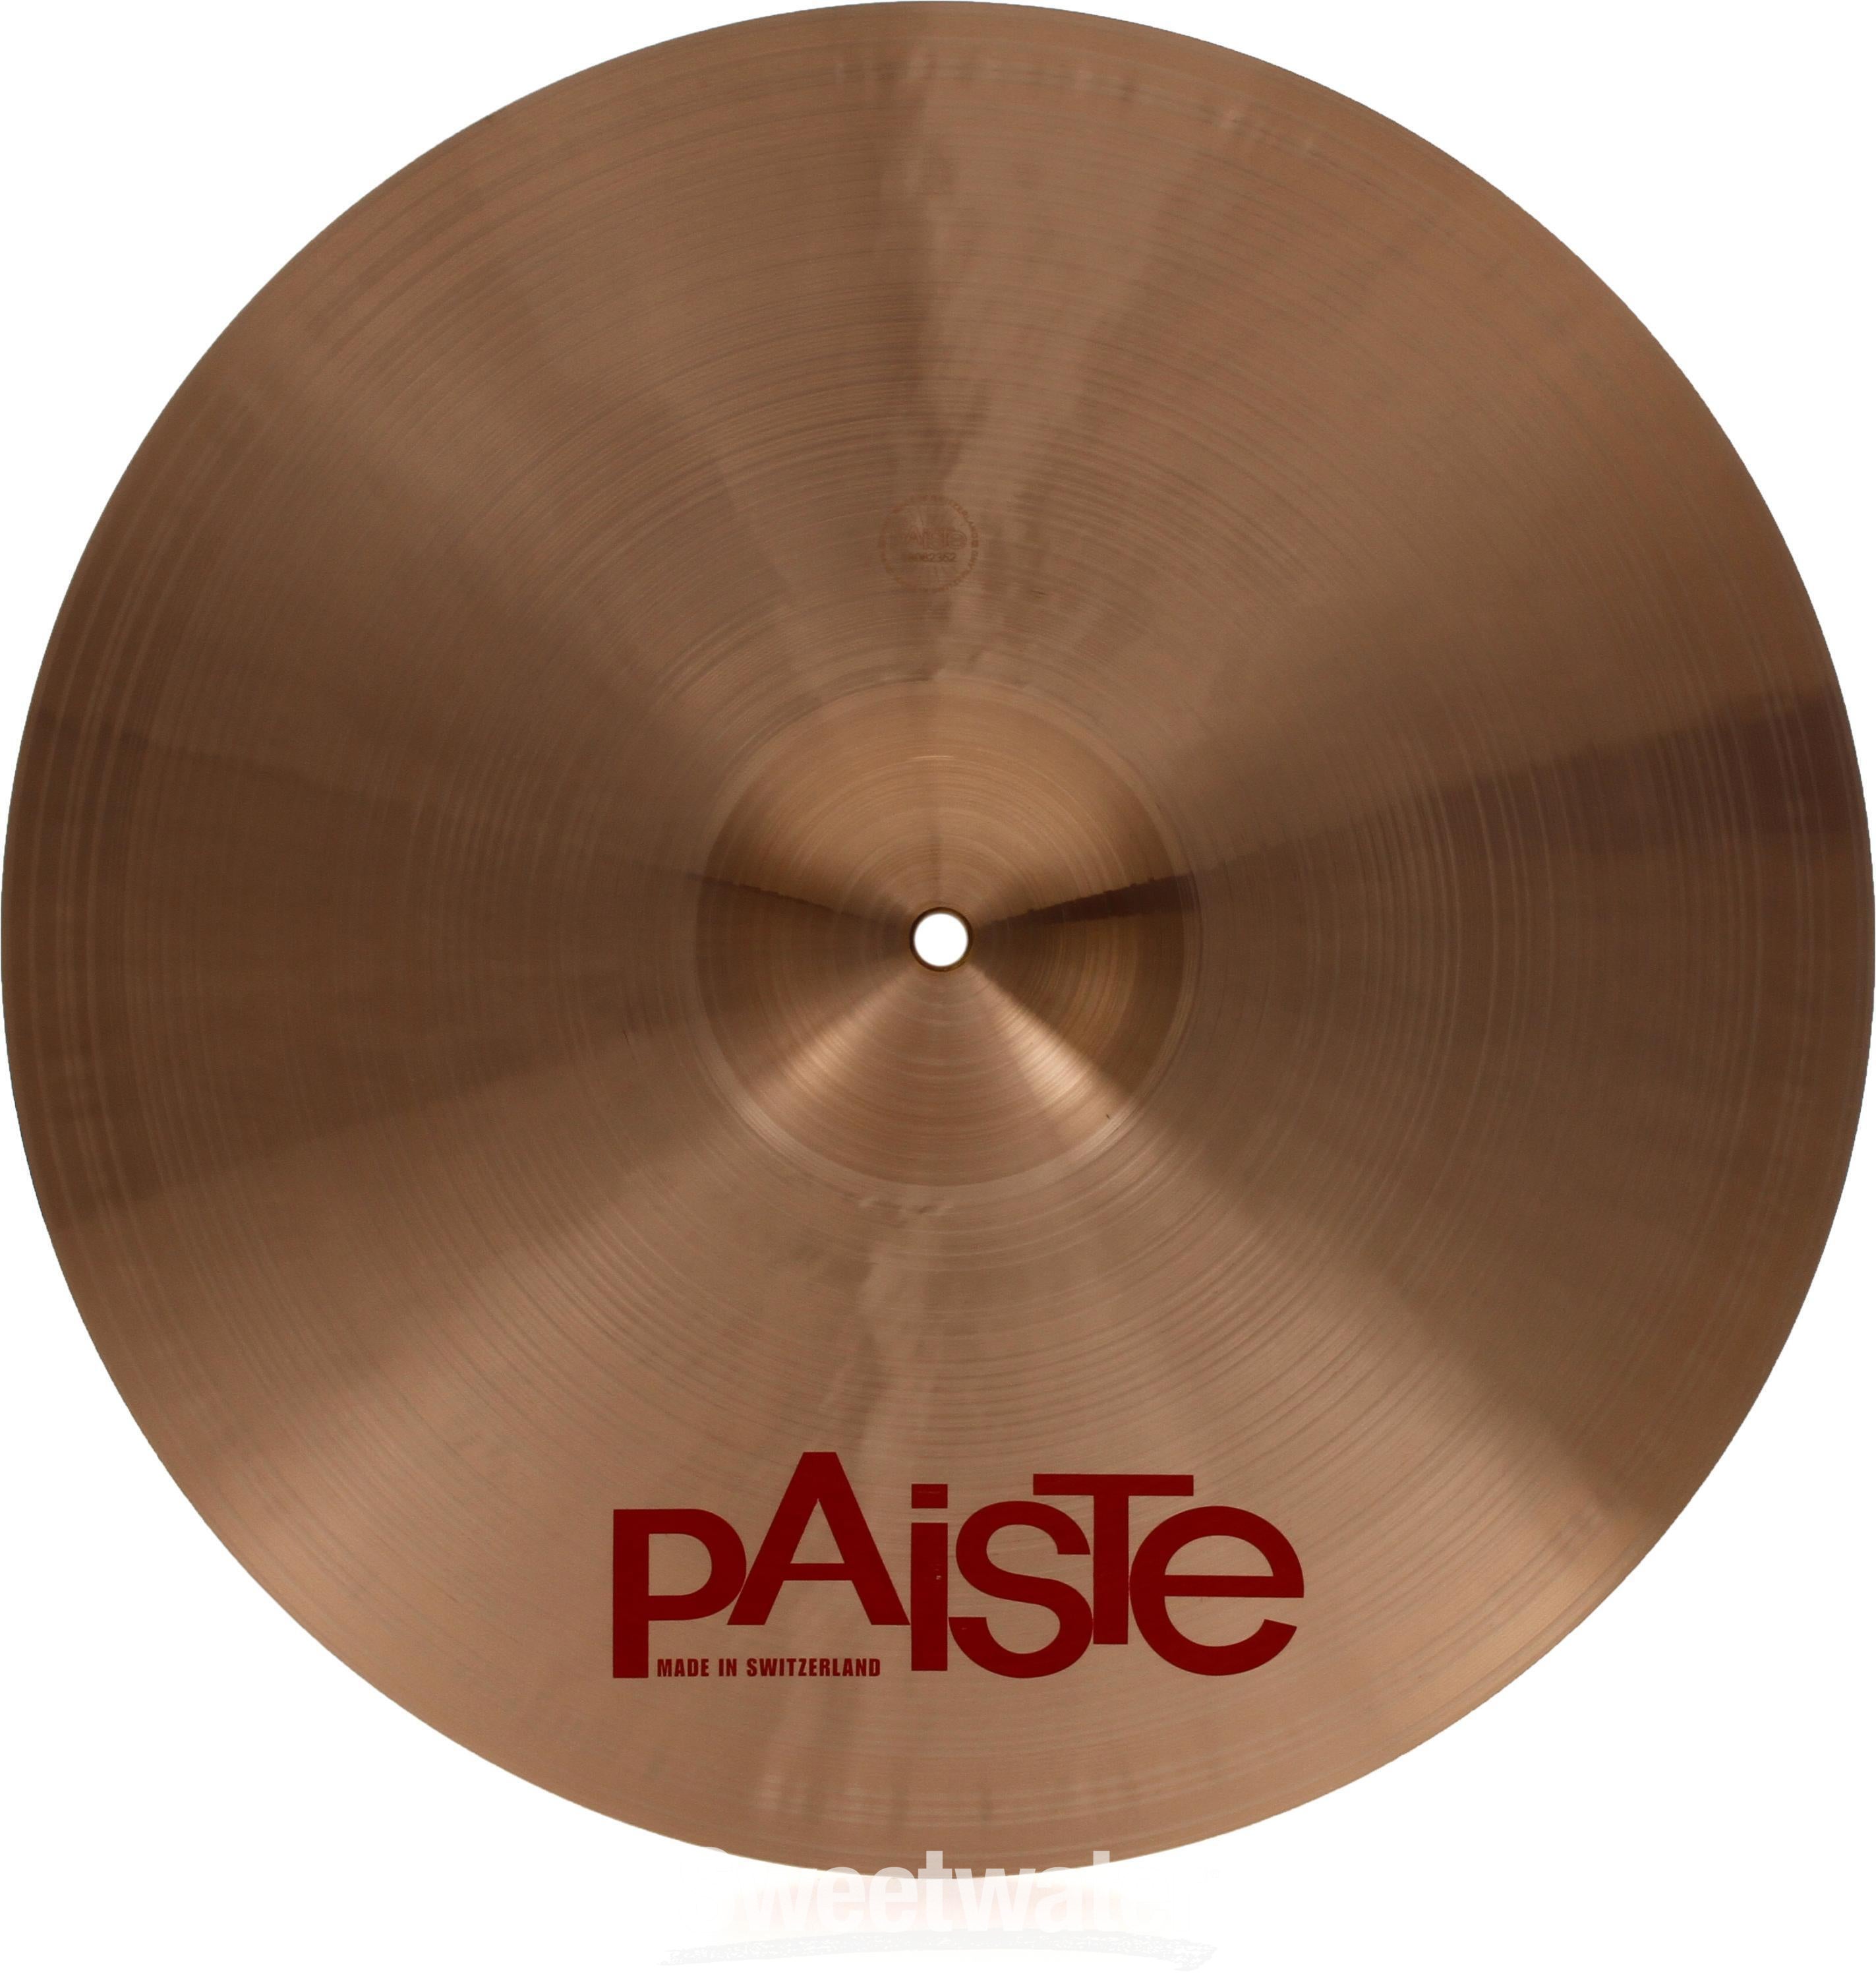 Paiste 17 inch 2002 Crash Cymbal | Sweetwater